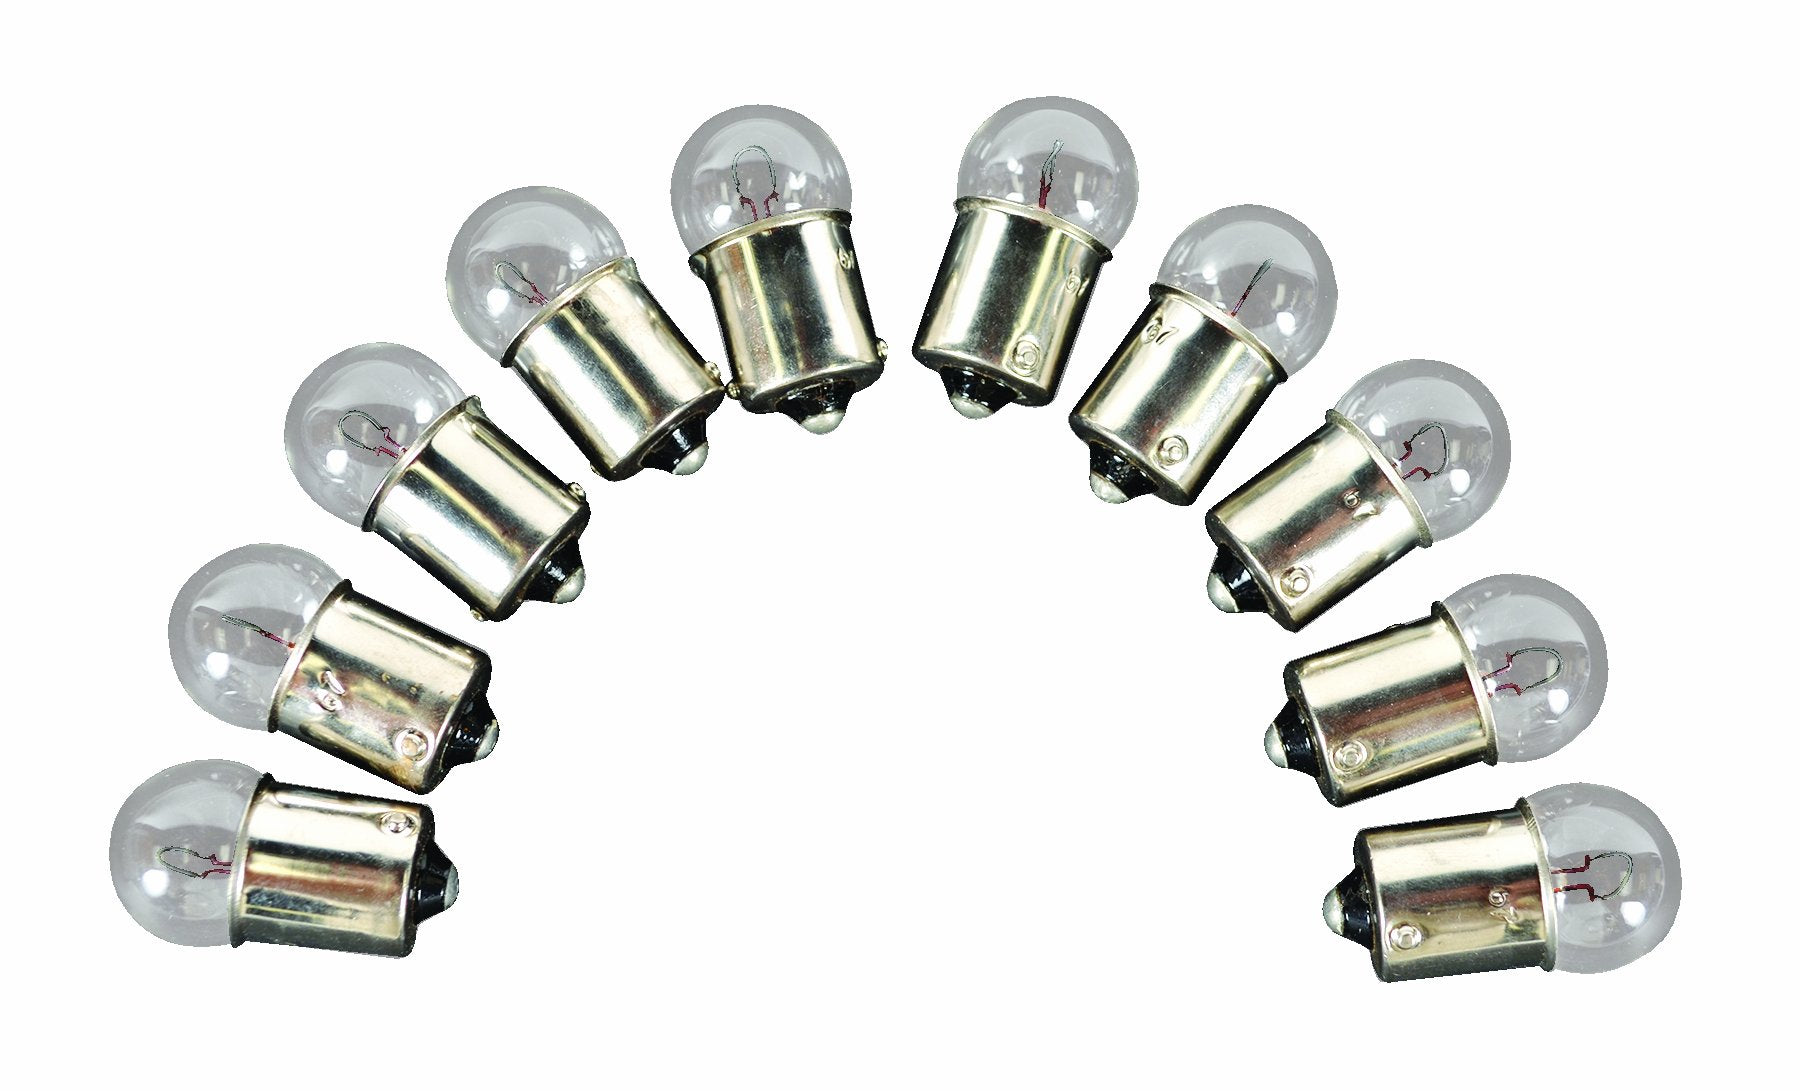 Camco 54720 Replacement 67 Auto License Plate Light Bulb - Box of 10